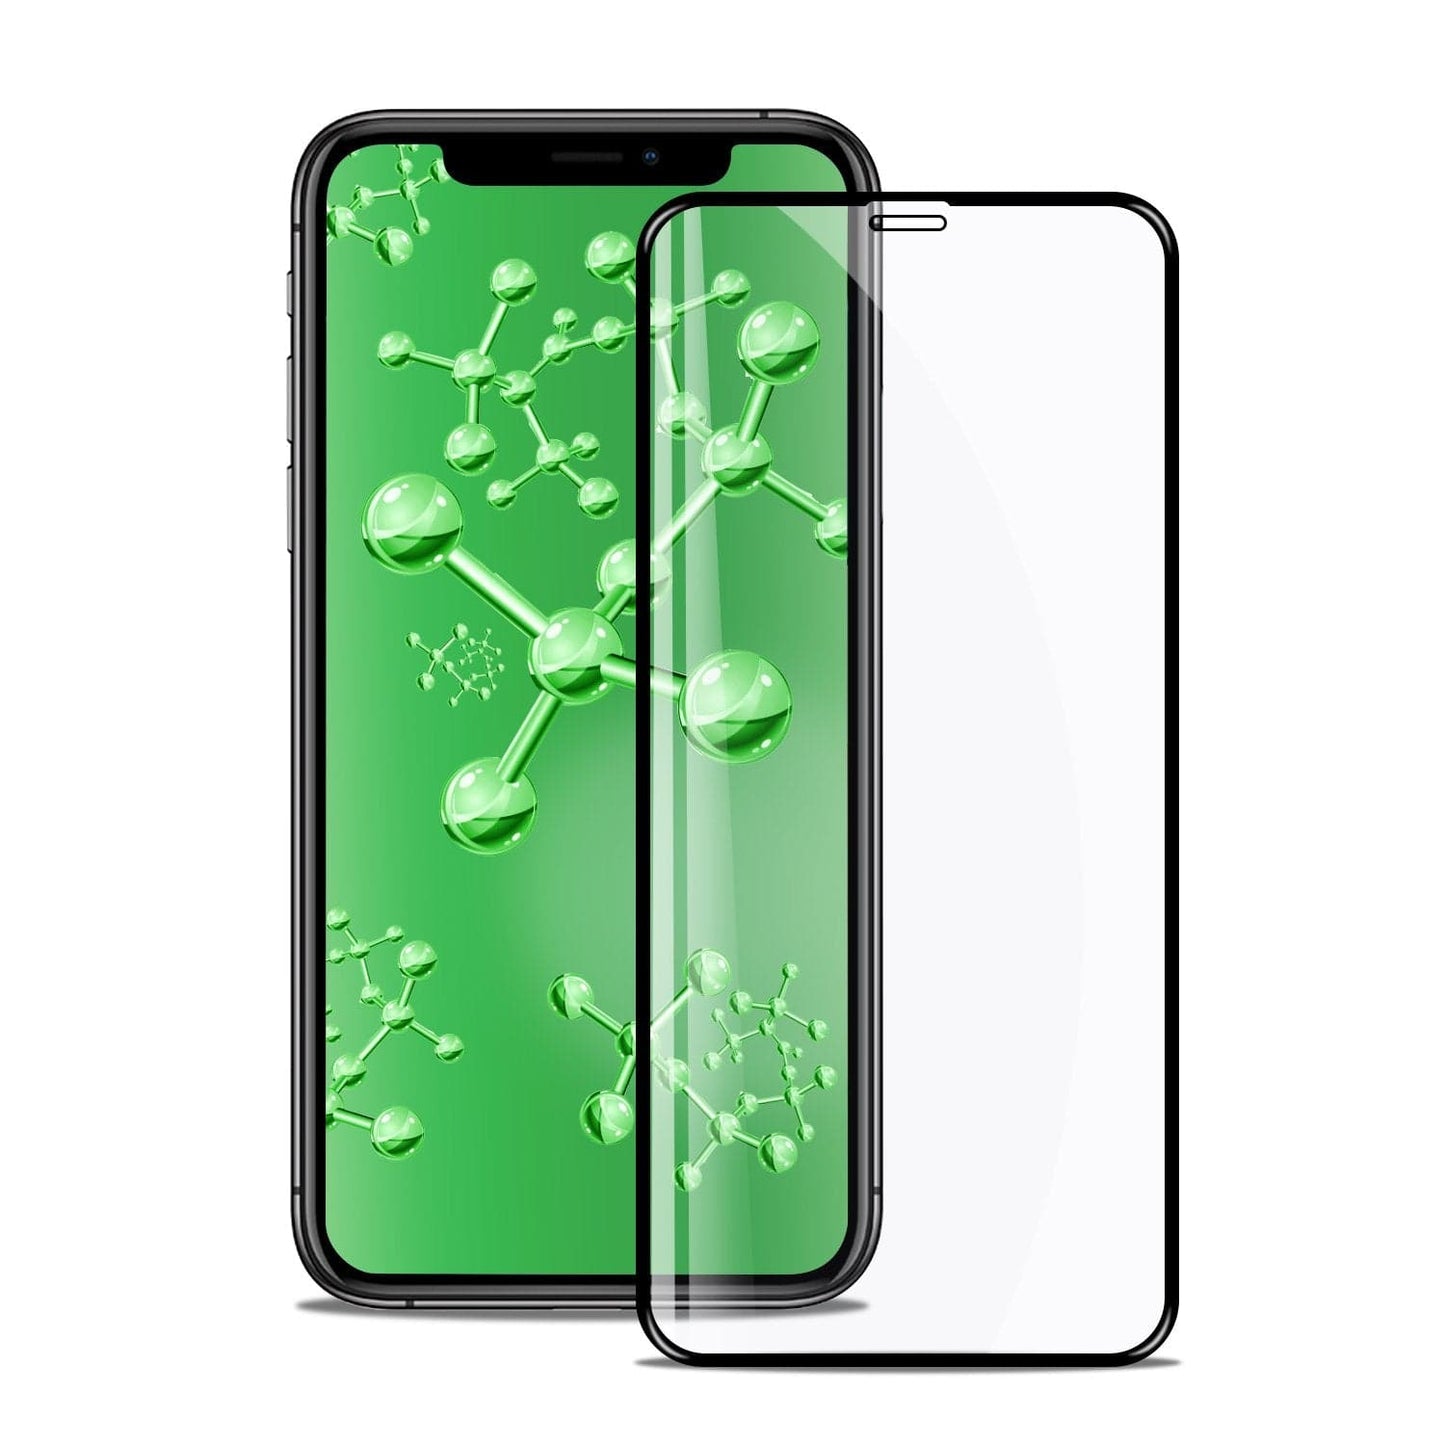 iPhone 11 Pro Tempered Glass Screen Protector Tough on Antibacterial